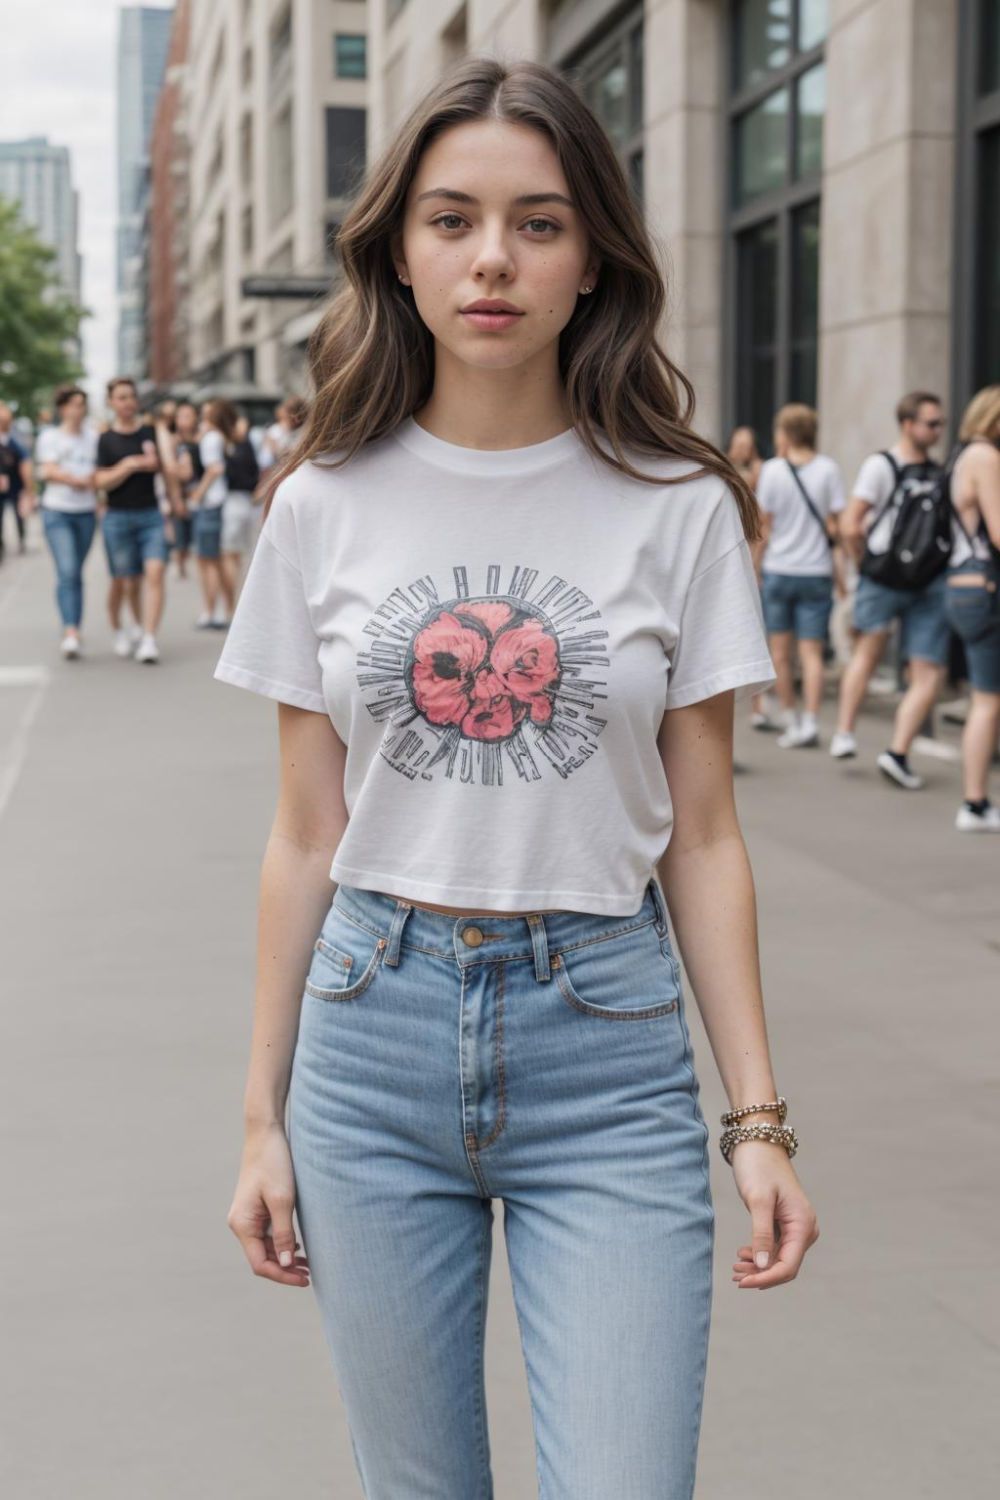 cool high waisted jeans and a graphic tee